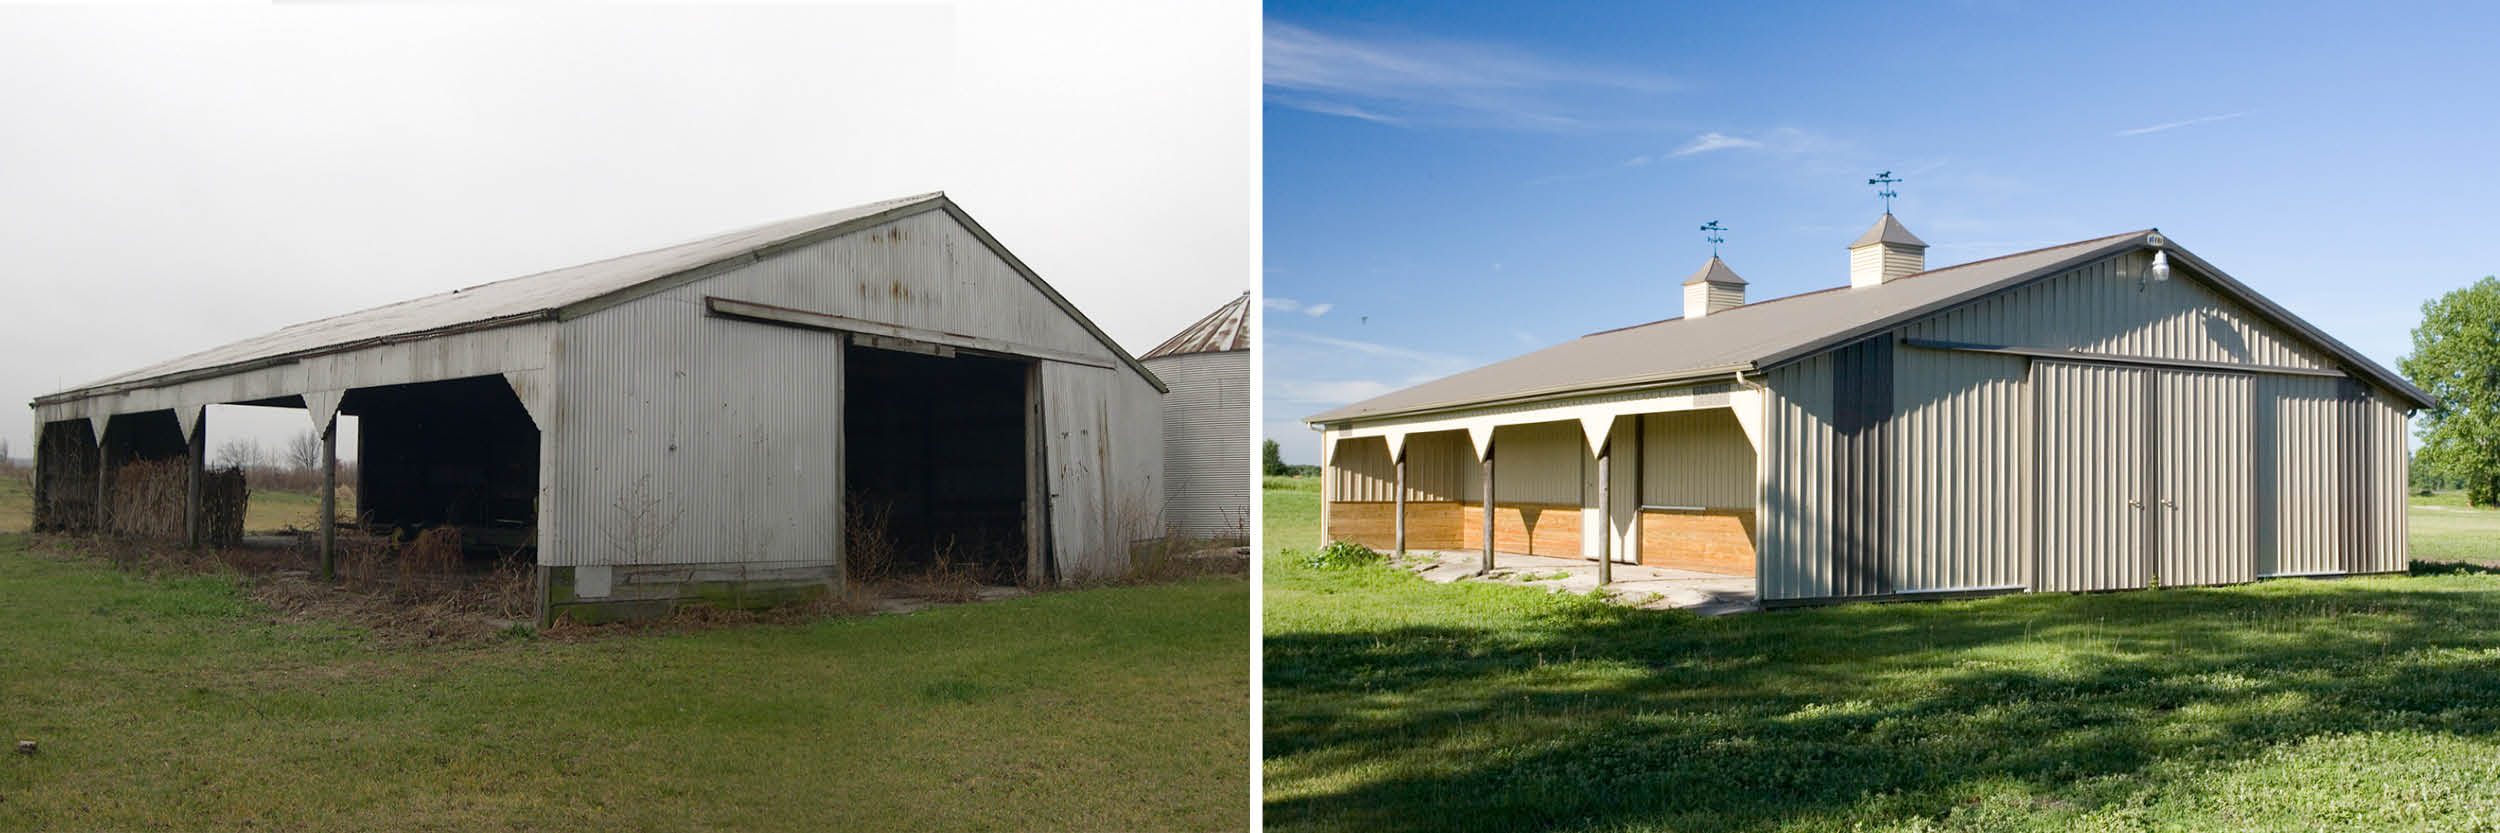 Pole Barn Renovation vs. New Post-Frame Construction: Which One is Right for You?